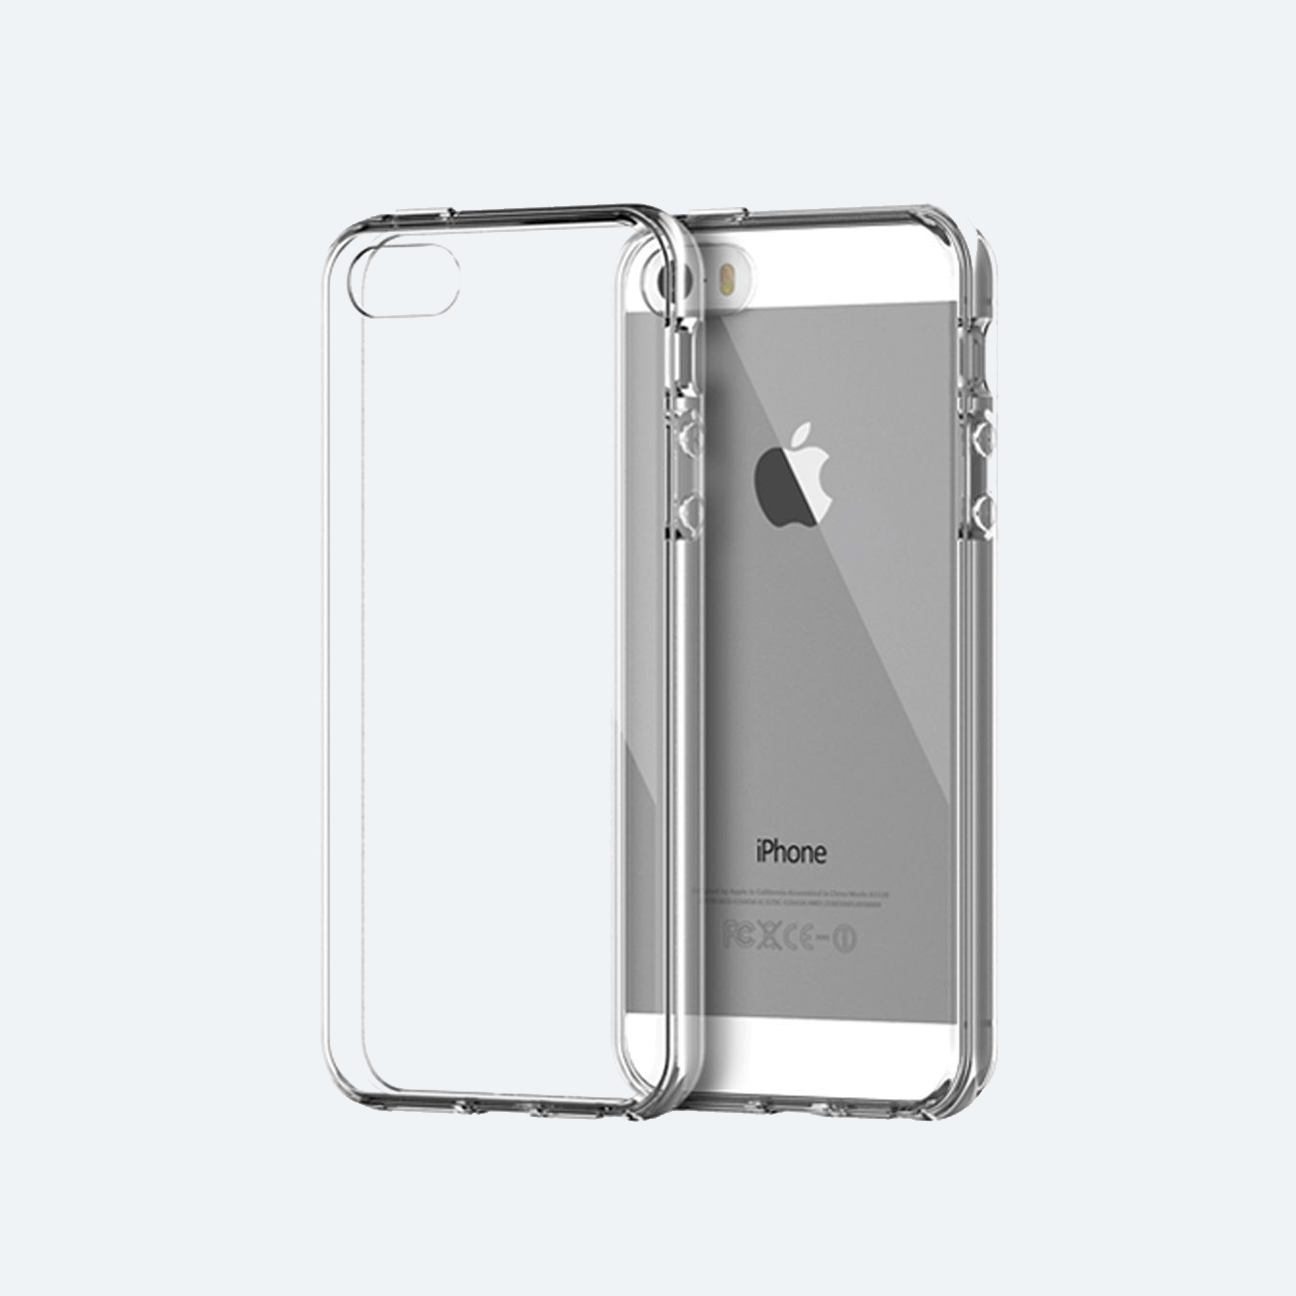 Apple iPhone 5 Transparent Back Cover